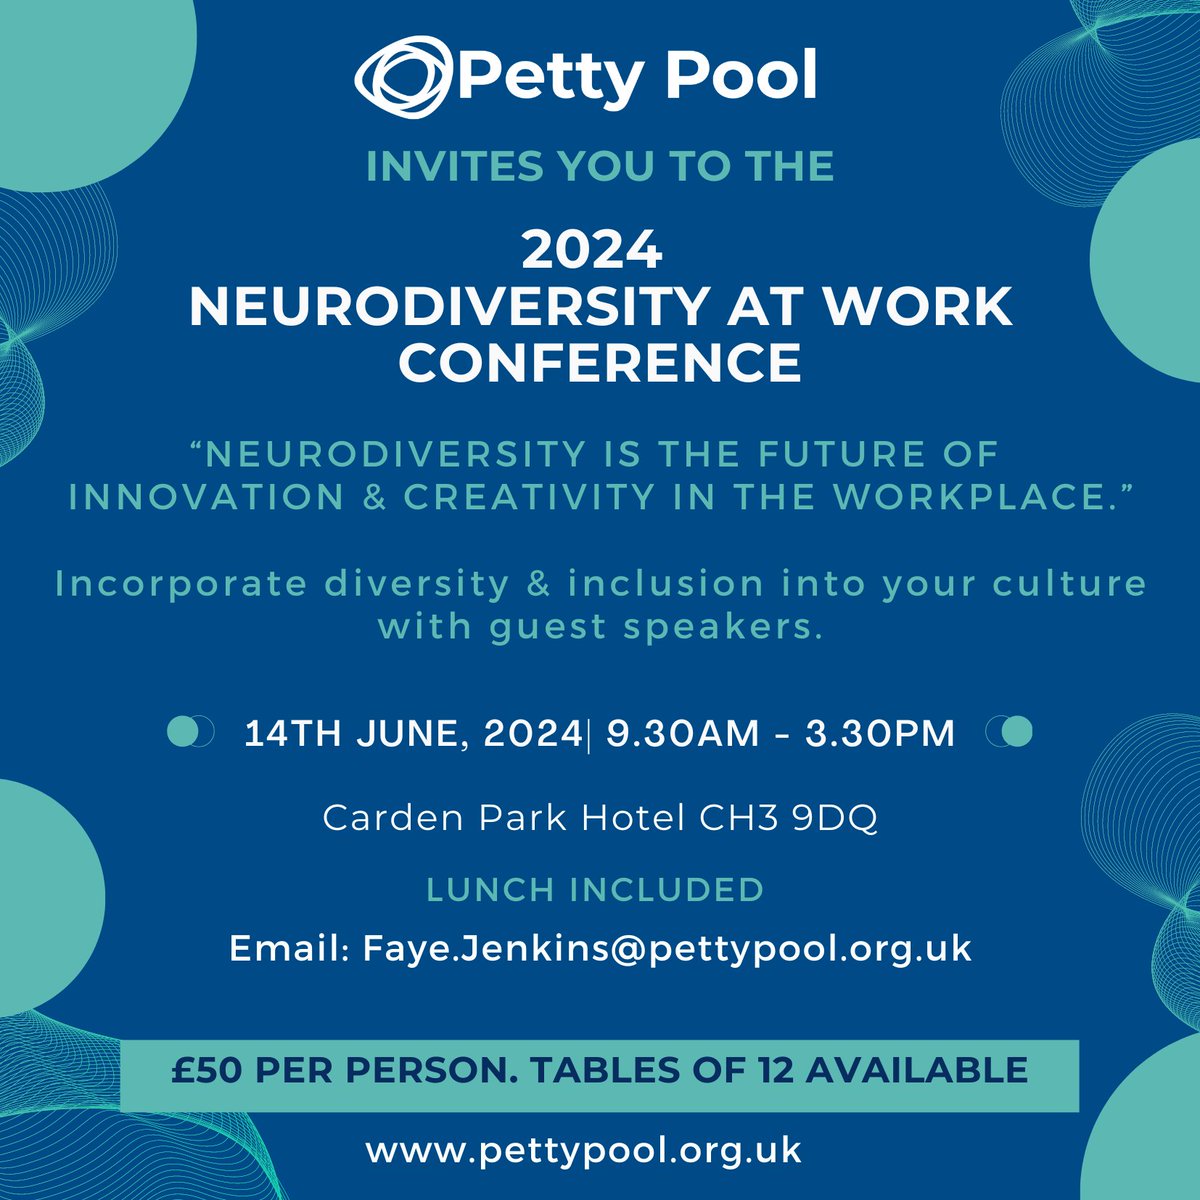 We are excited to launch this event that provides a great opportunity to network and get ideas about supporting colleagues in the workplace as well as giving placement opportunities to our young people #neurodiversityatwork #cpd #network #networkingevent